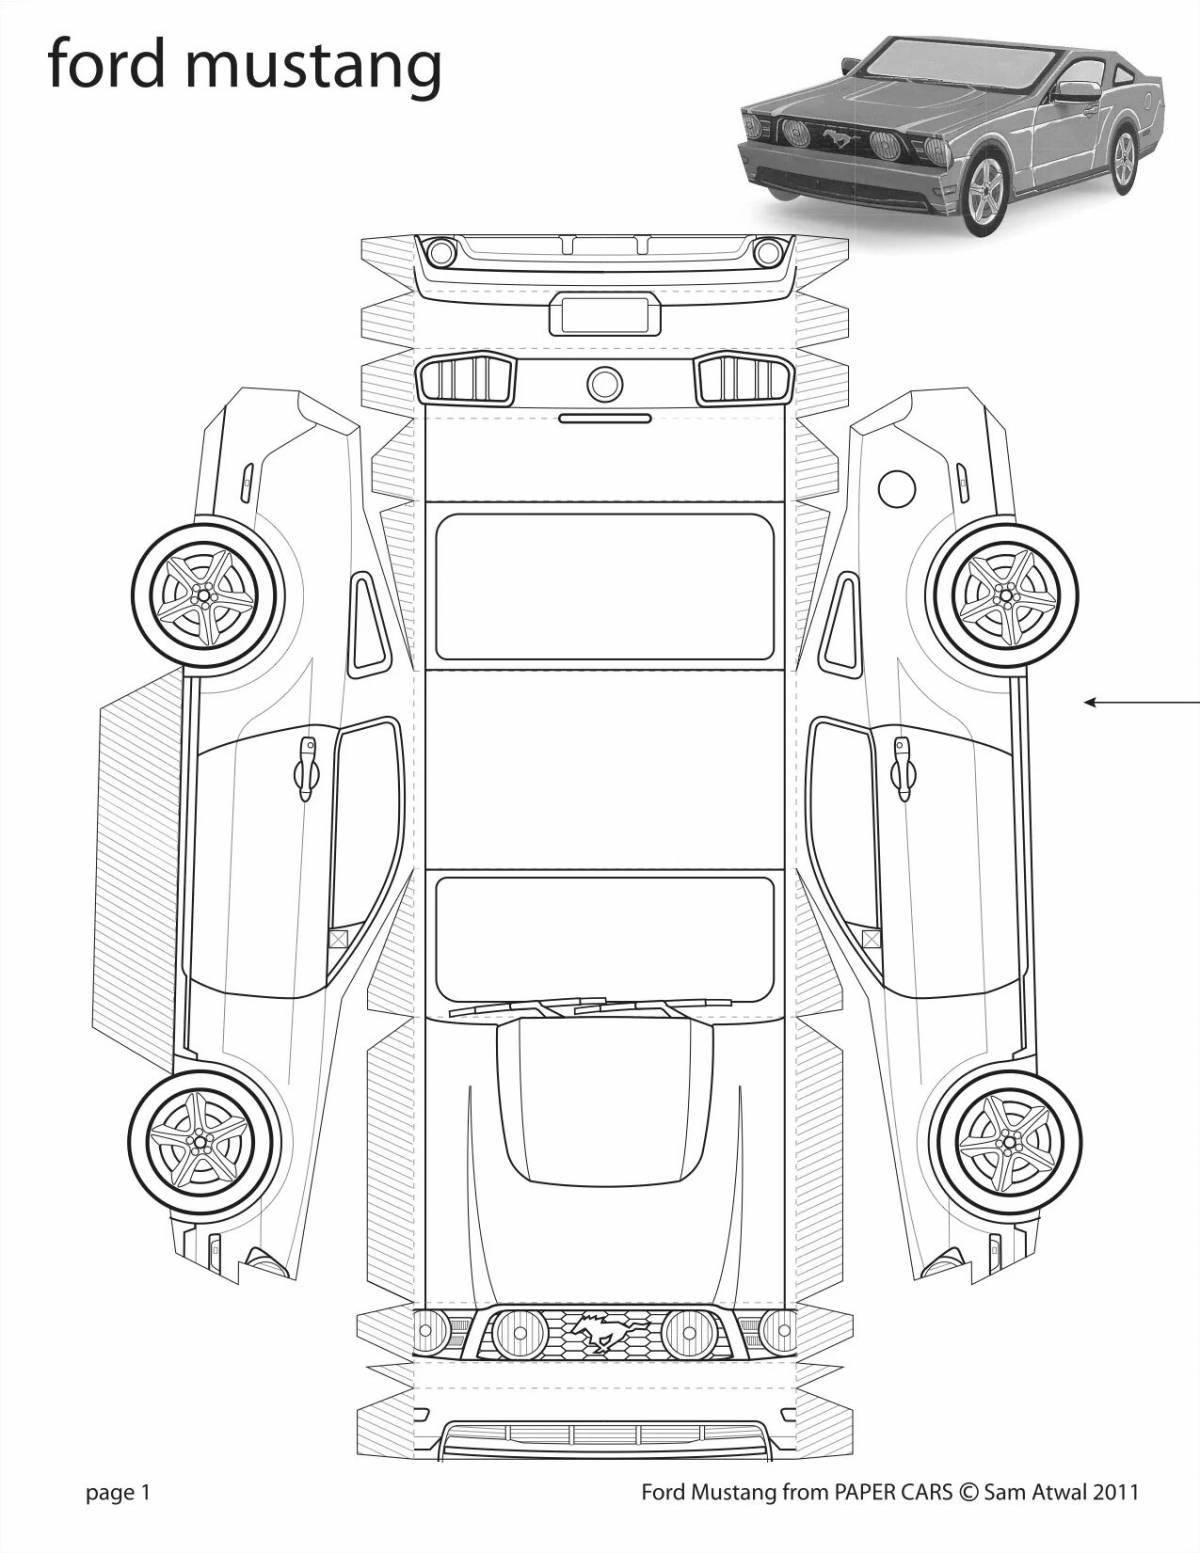 Coloring page of intricate car layout